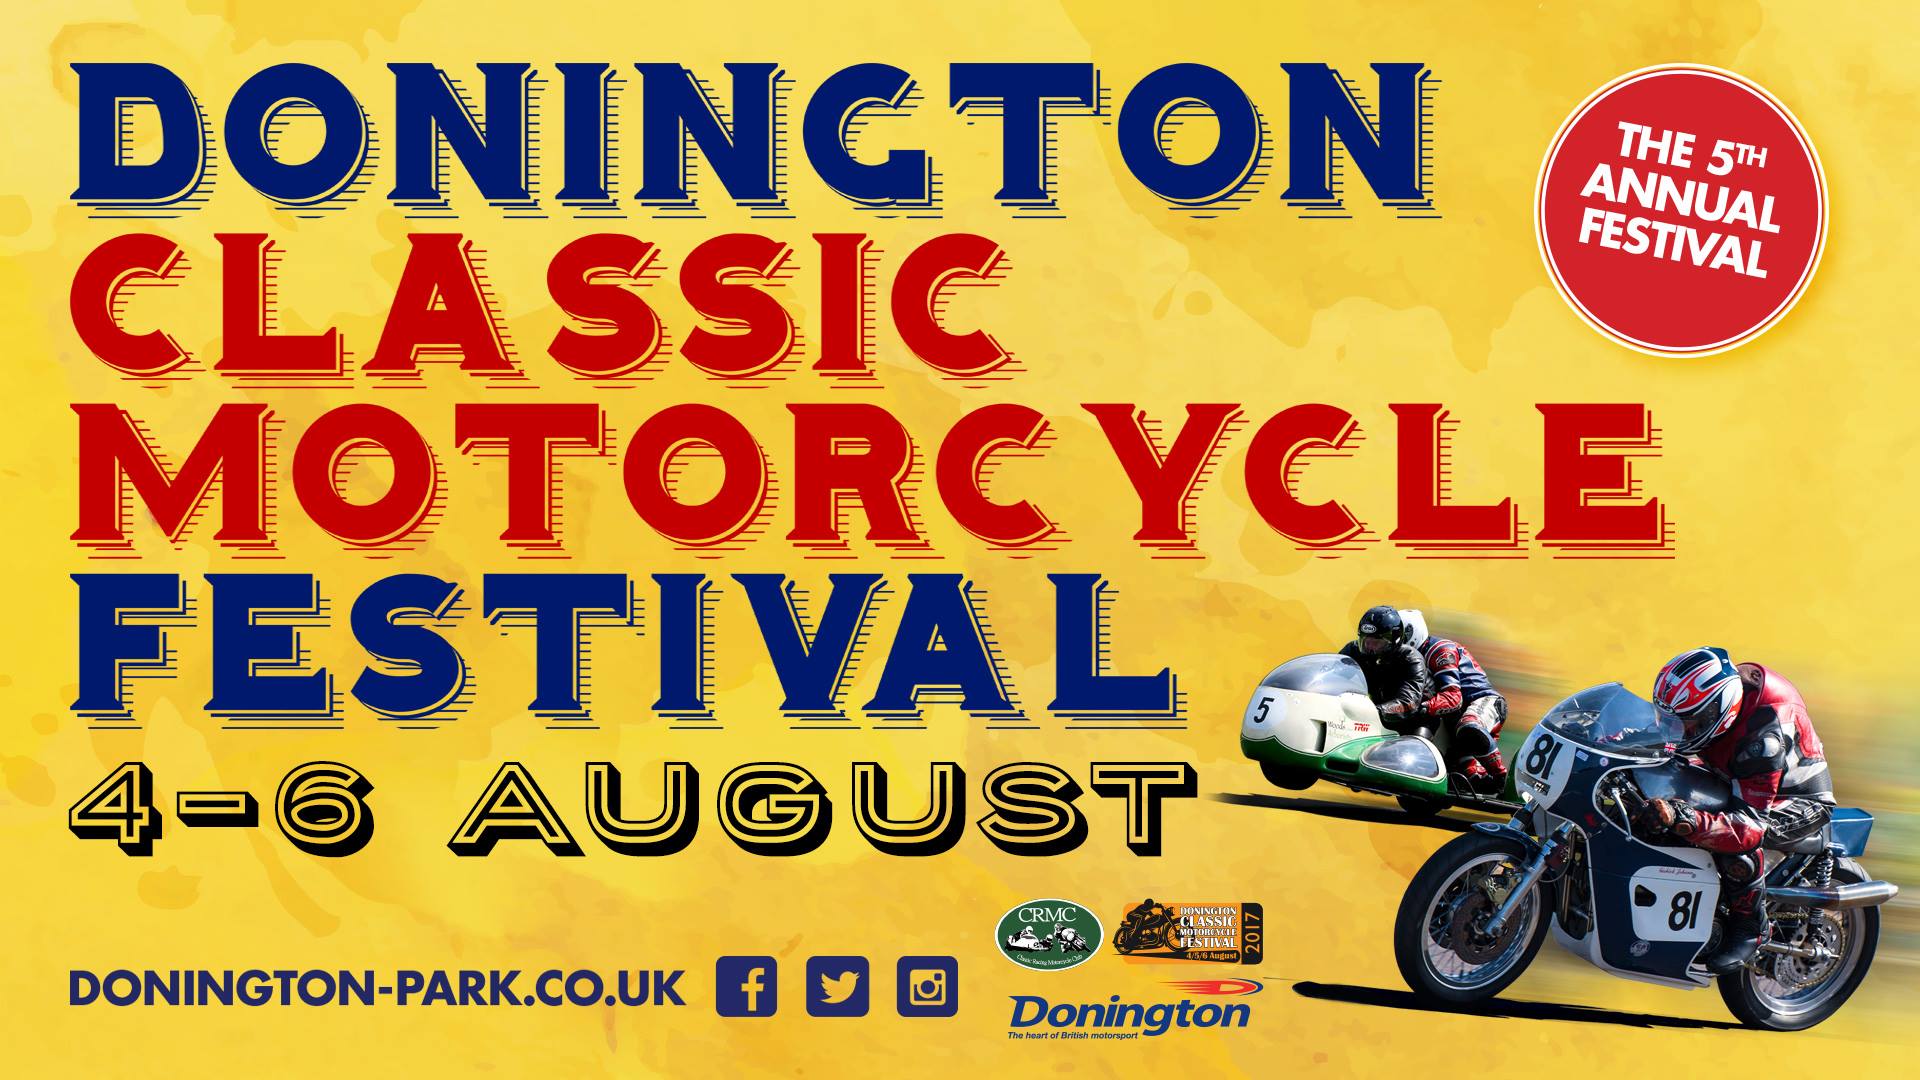 Donington Classic Motorcycle Festival, August 2017